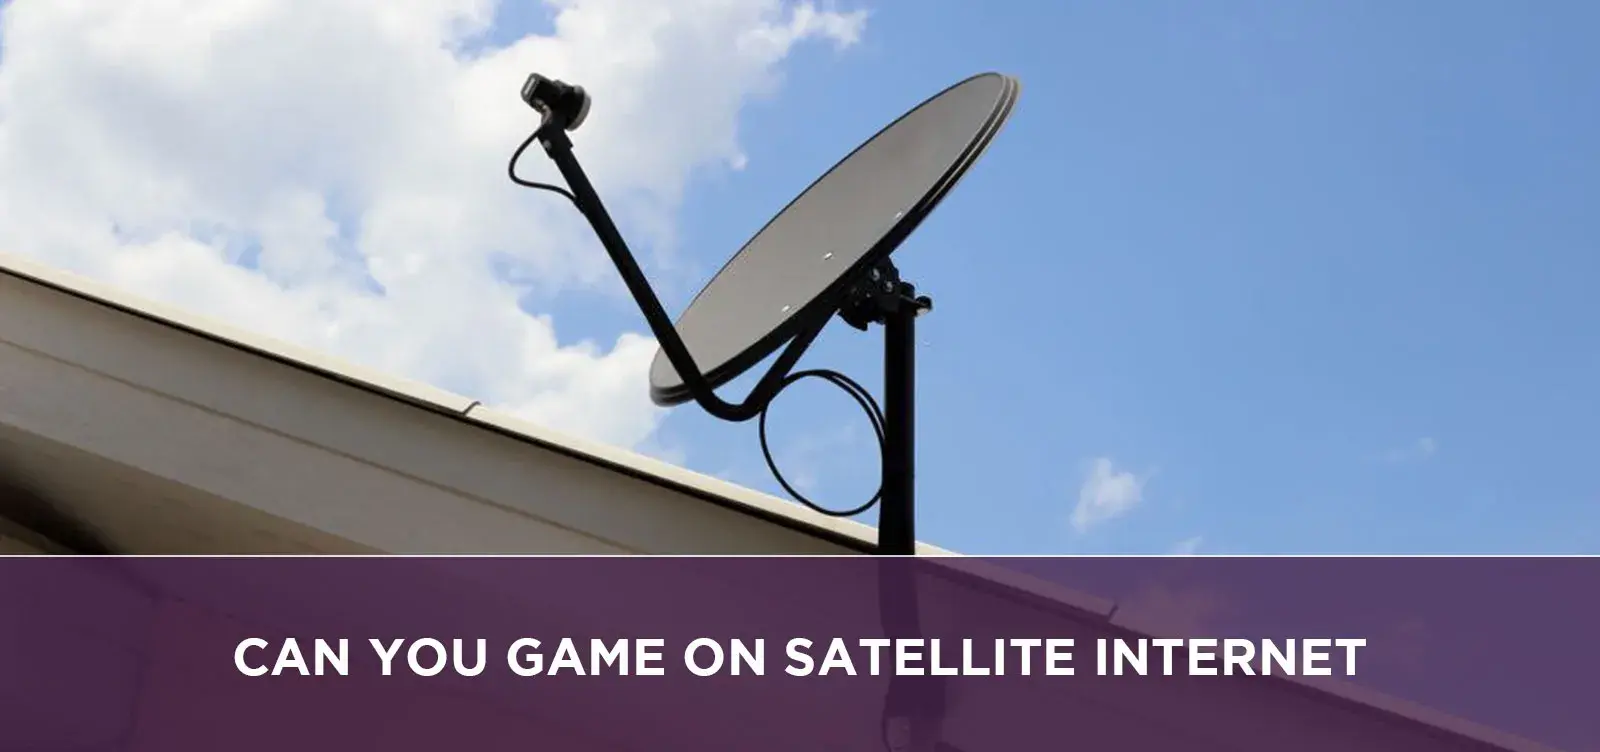 Can You Game On Satellite Internet?